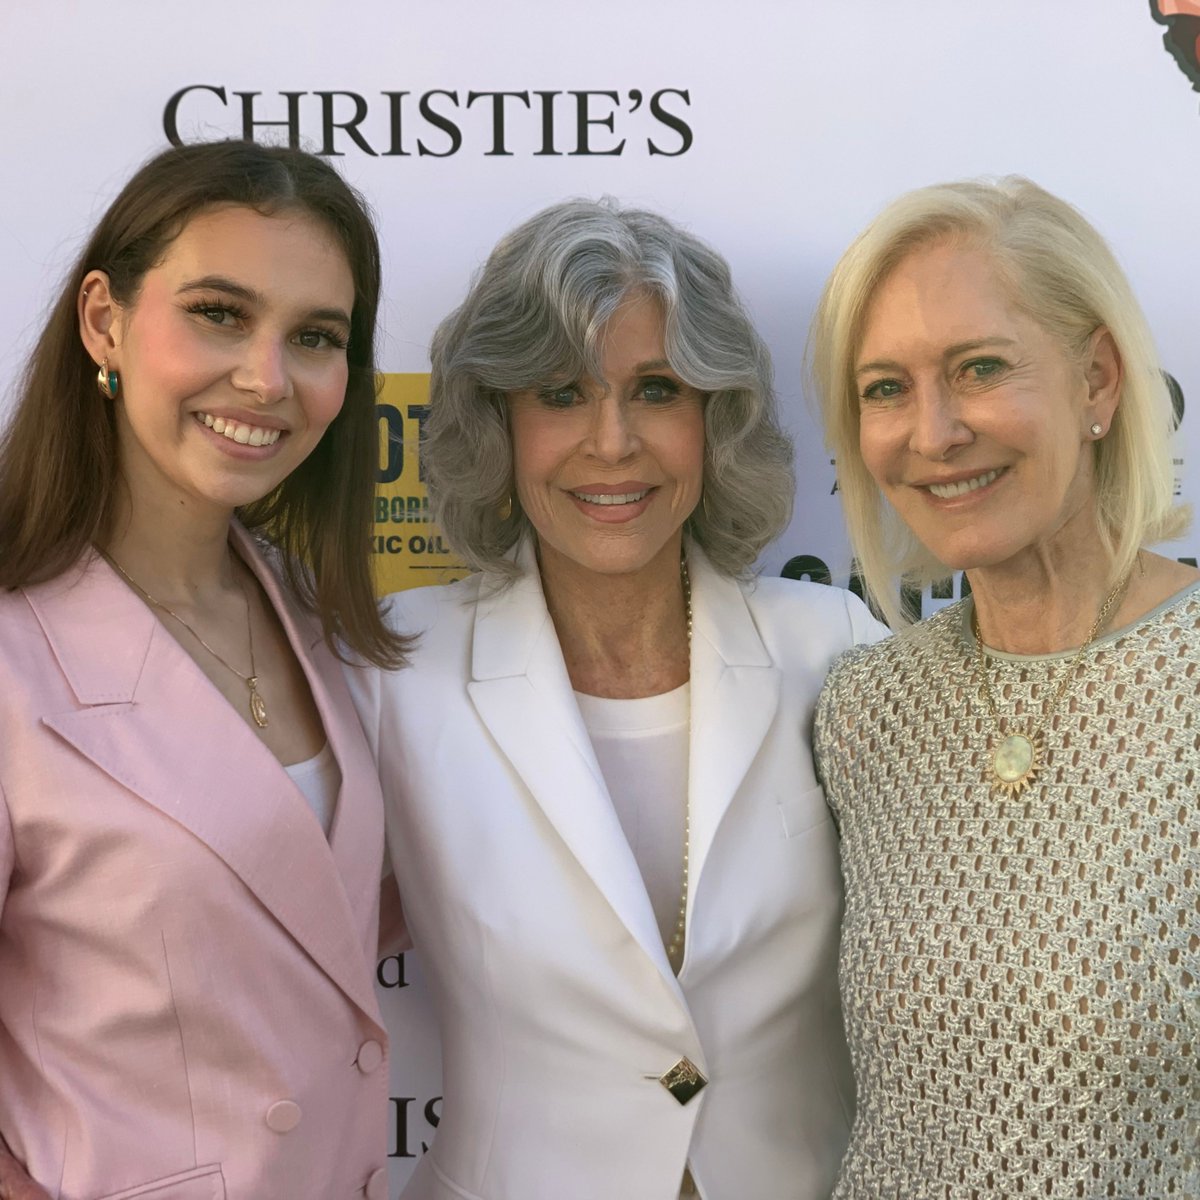 What a night! Honored to join advocates Nalleli Cobo and @Janefonda and so many other incredible people to support @CAvsBigOil. We're joining together to fight Big Oil---because everyone deserves to breathe clean air. Learn more: cavsbigoil.com